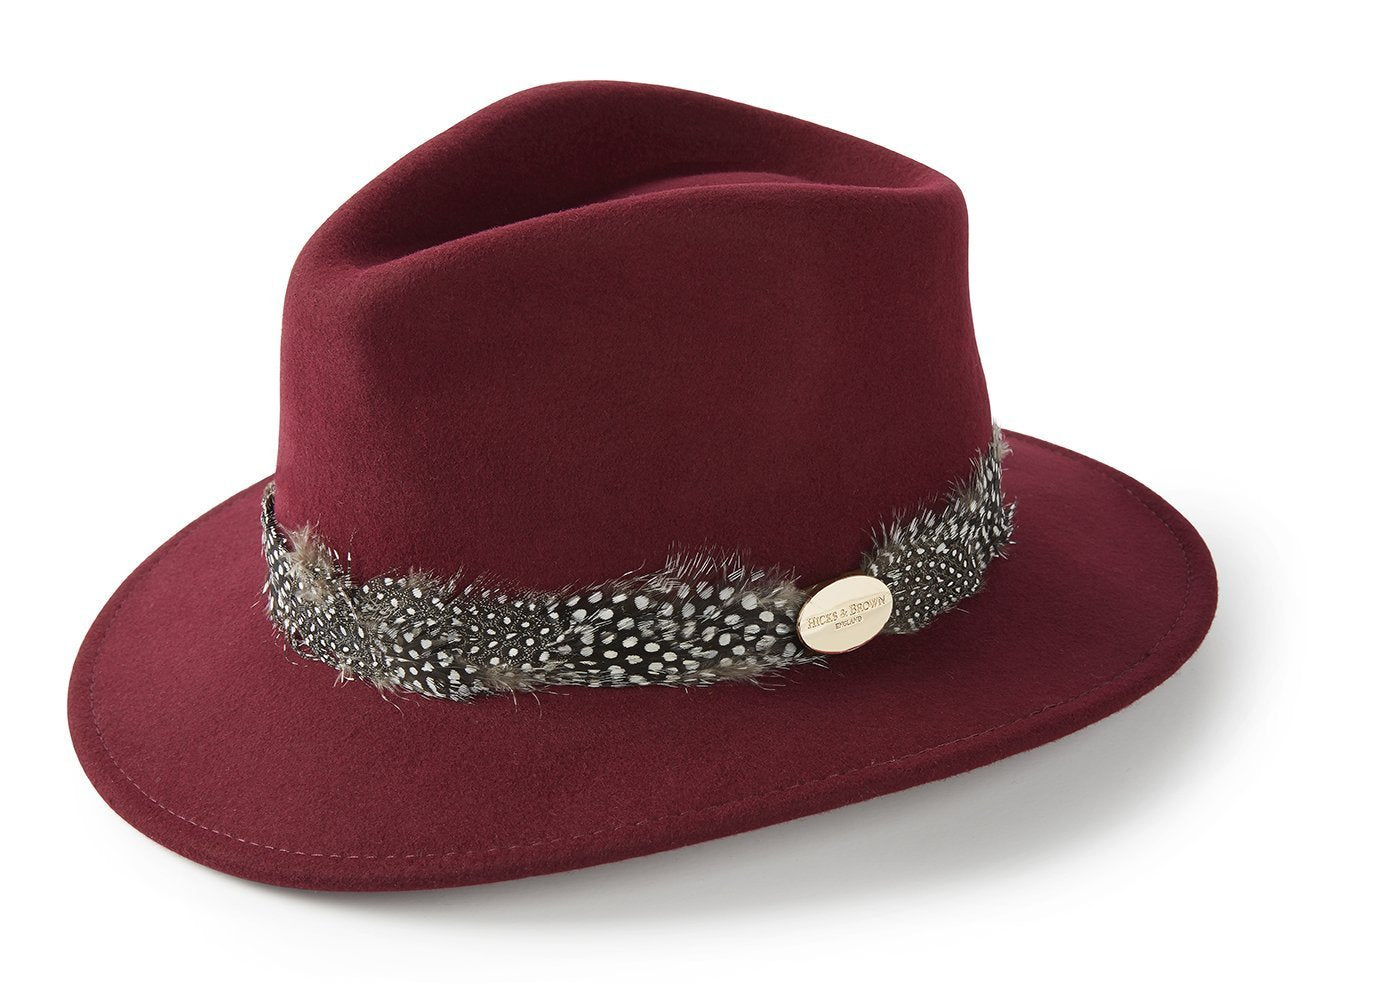 Hicks & Brown Fedora The Suffolk Fedora in Maroon (Guinea Feather Wrap)